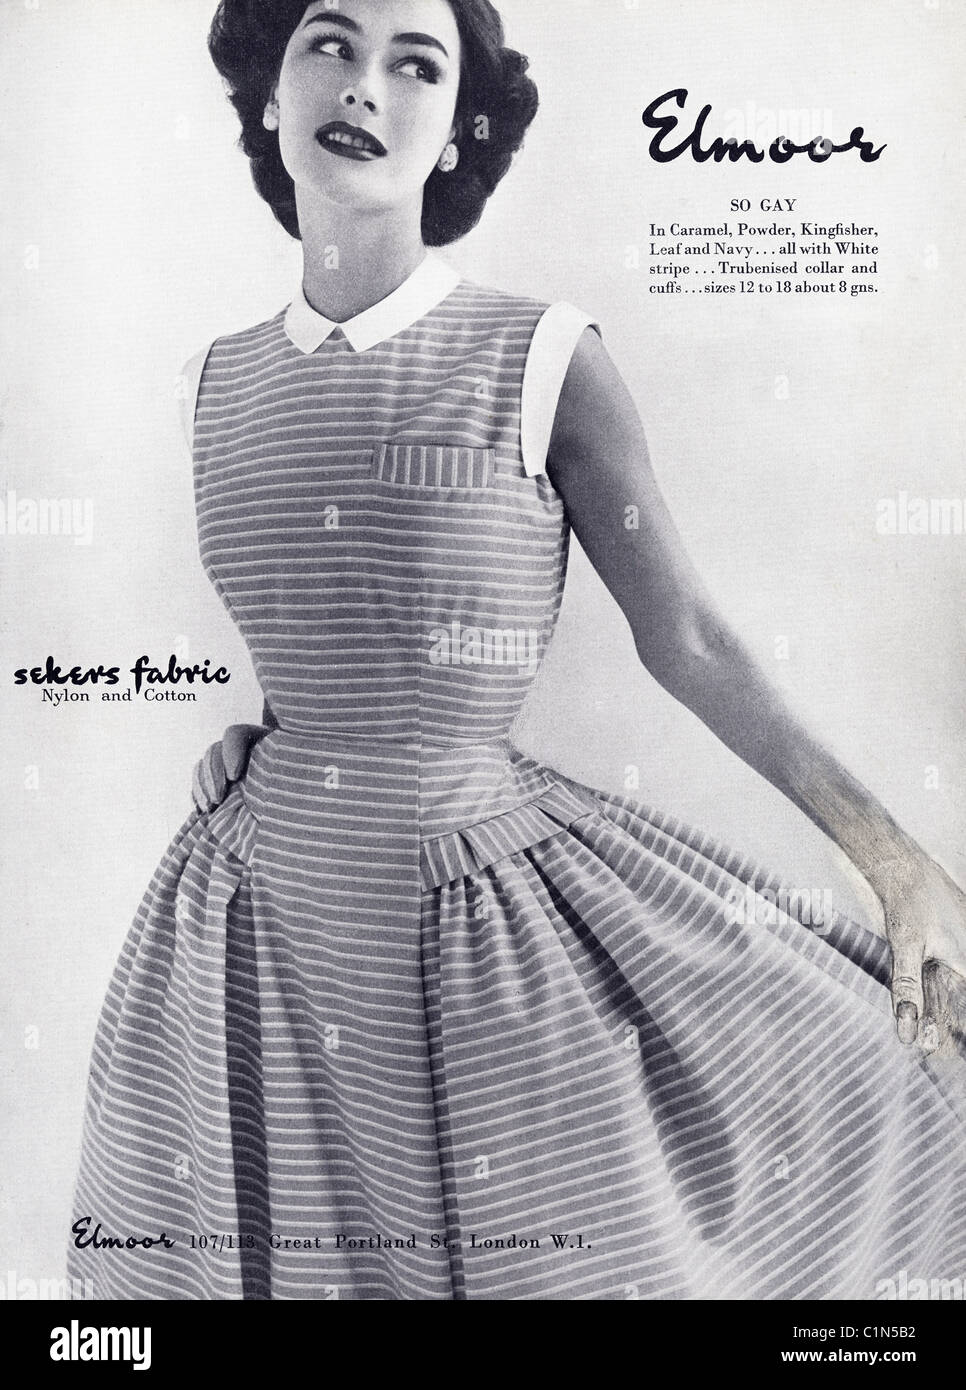 Women's Fashion In The 1950s | vlr.eng.br